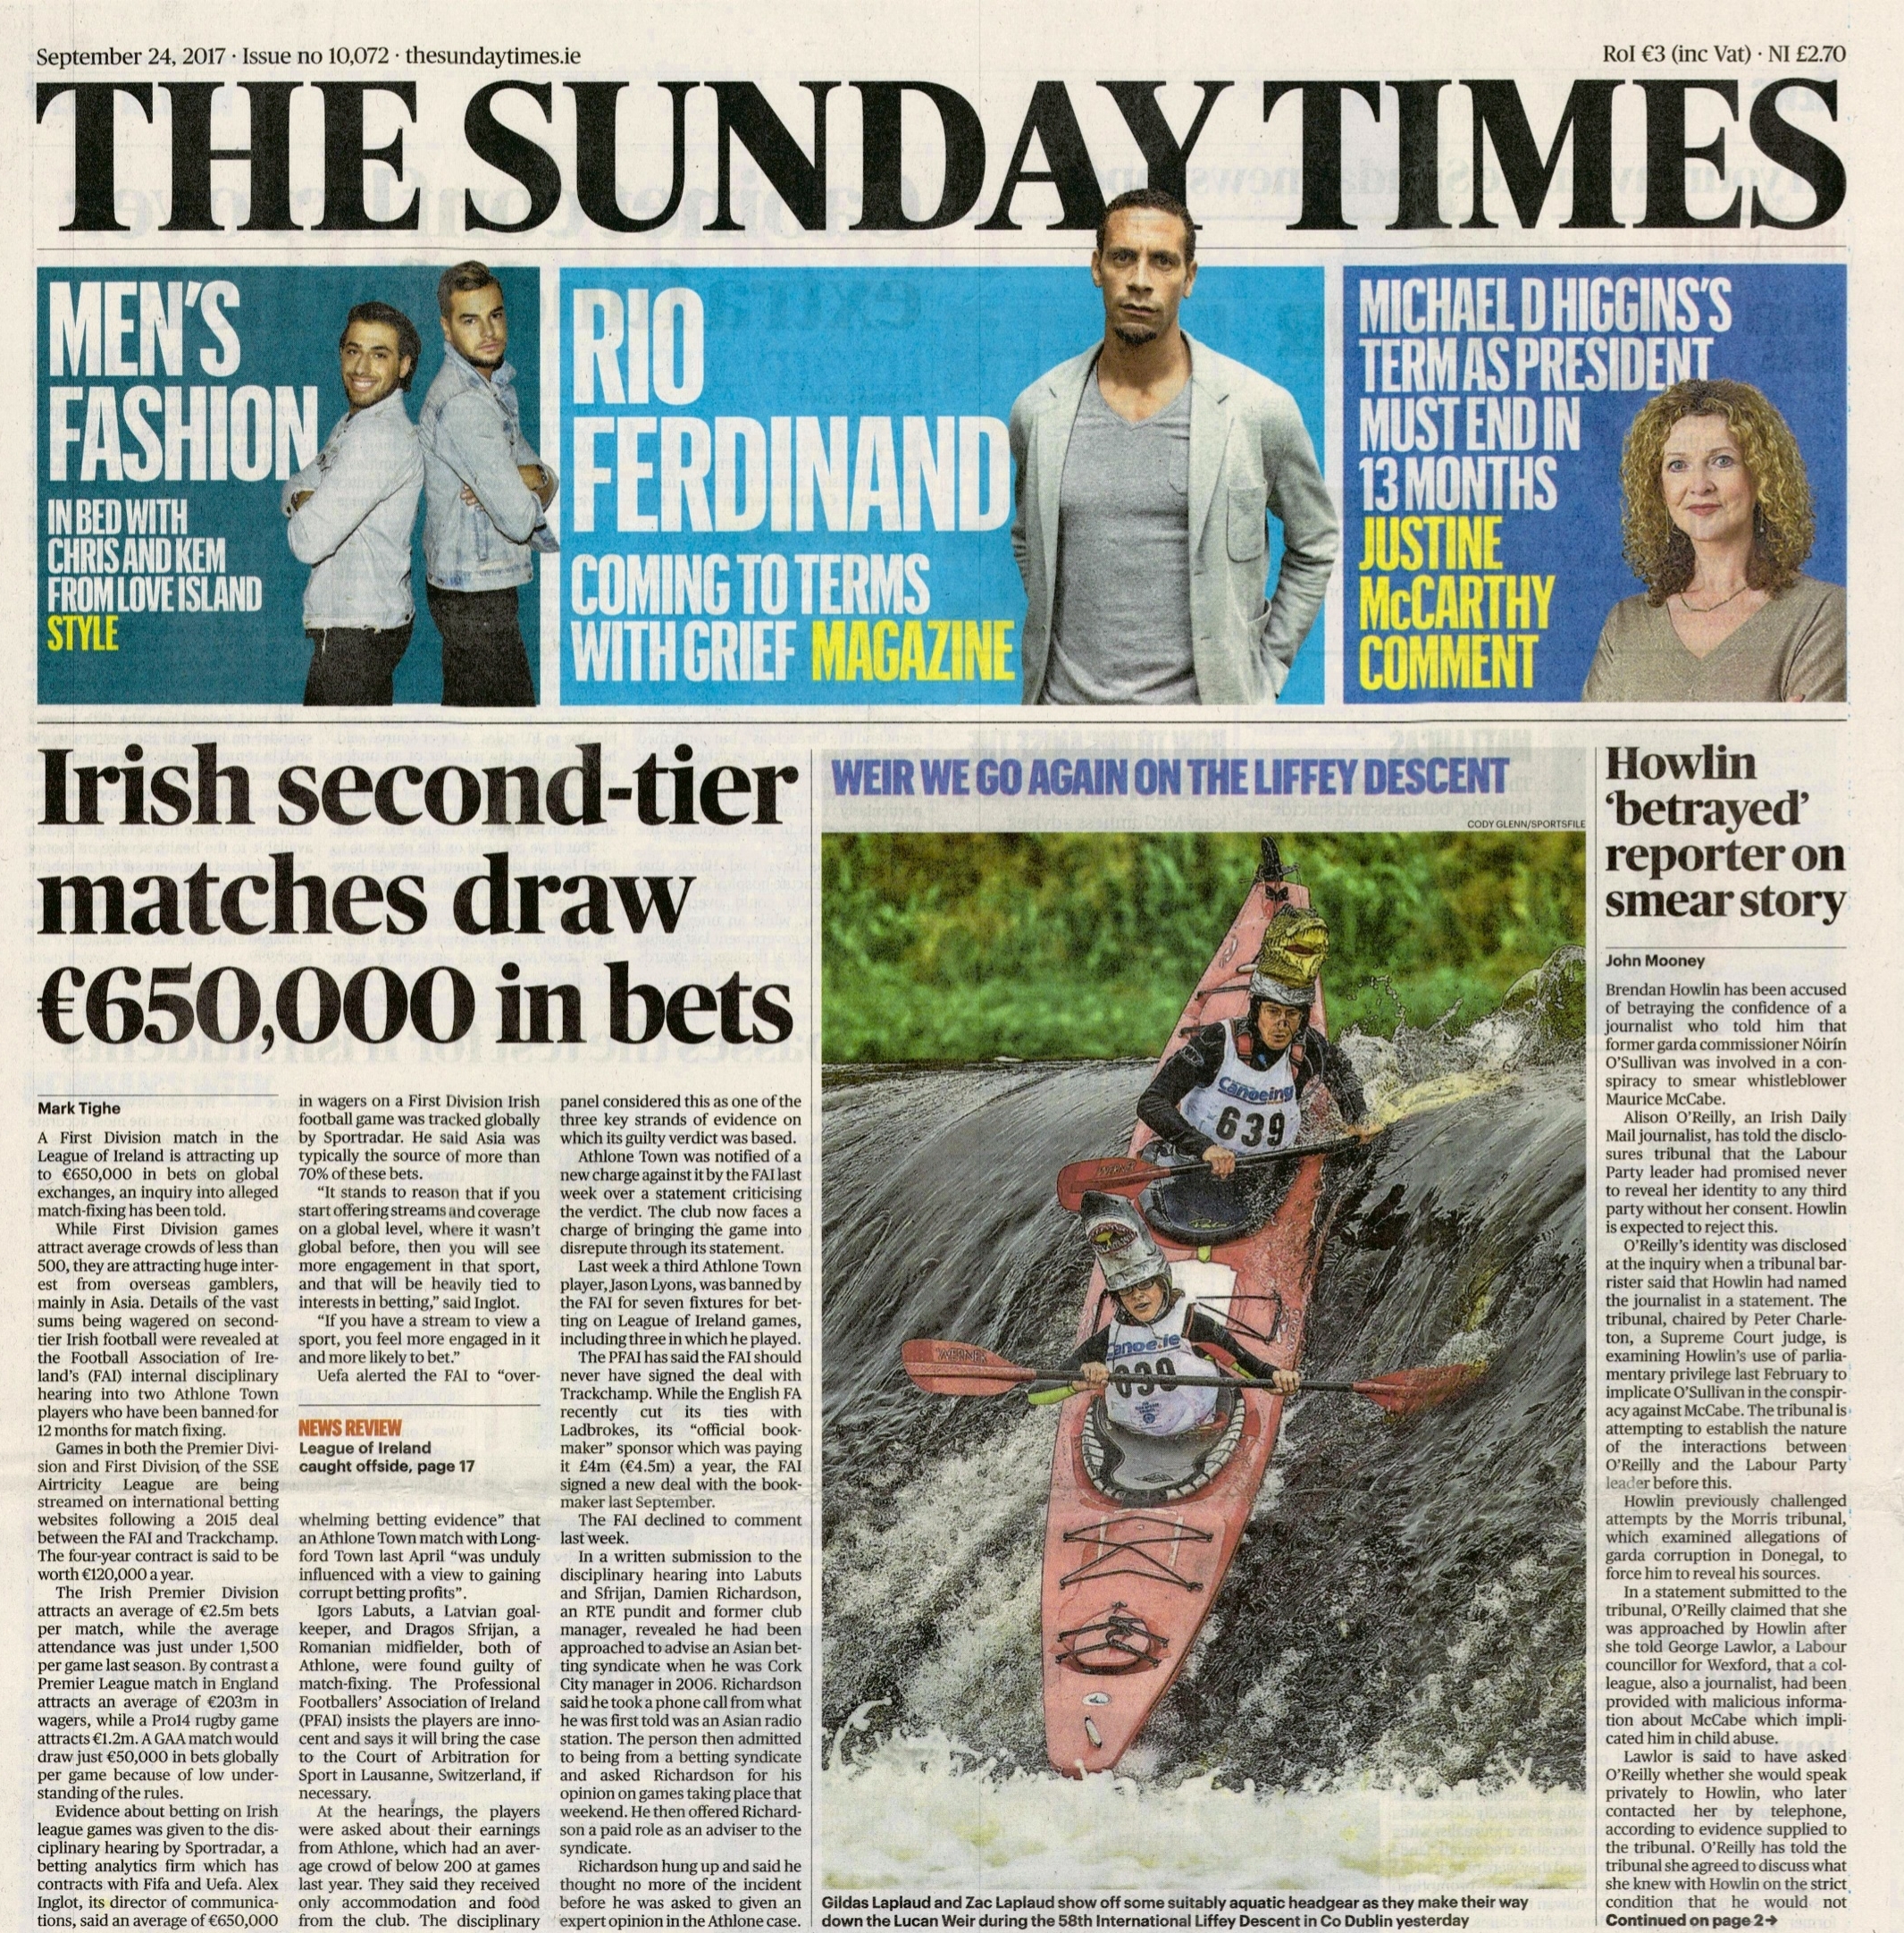  The Liffey Descent in Dublin, Ireland September 24 2017  / The Sunday Times  